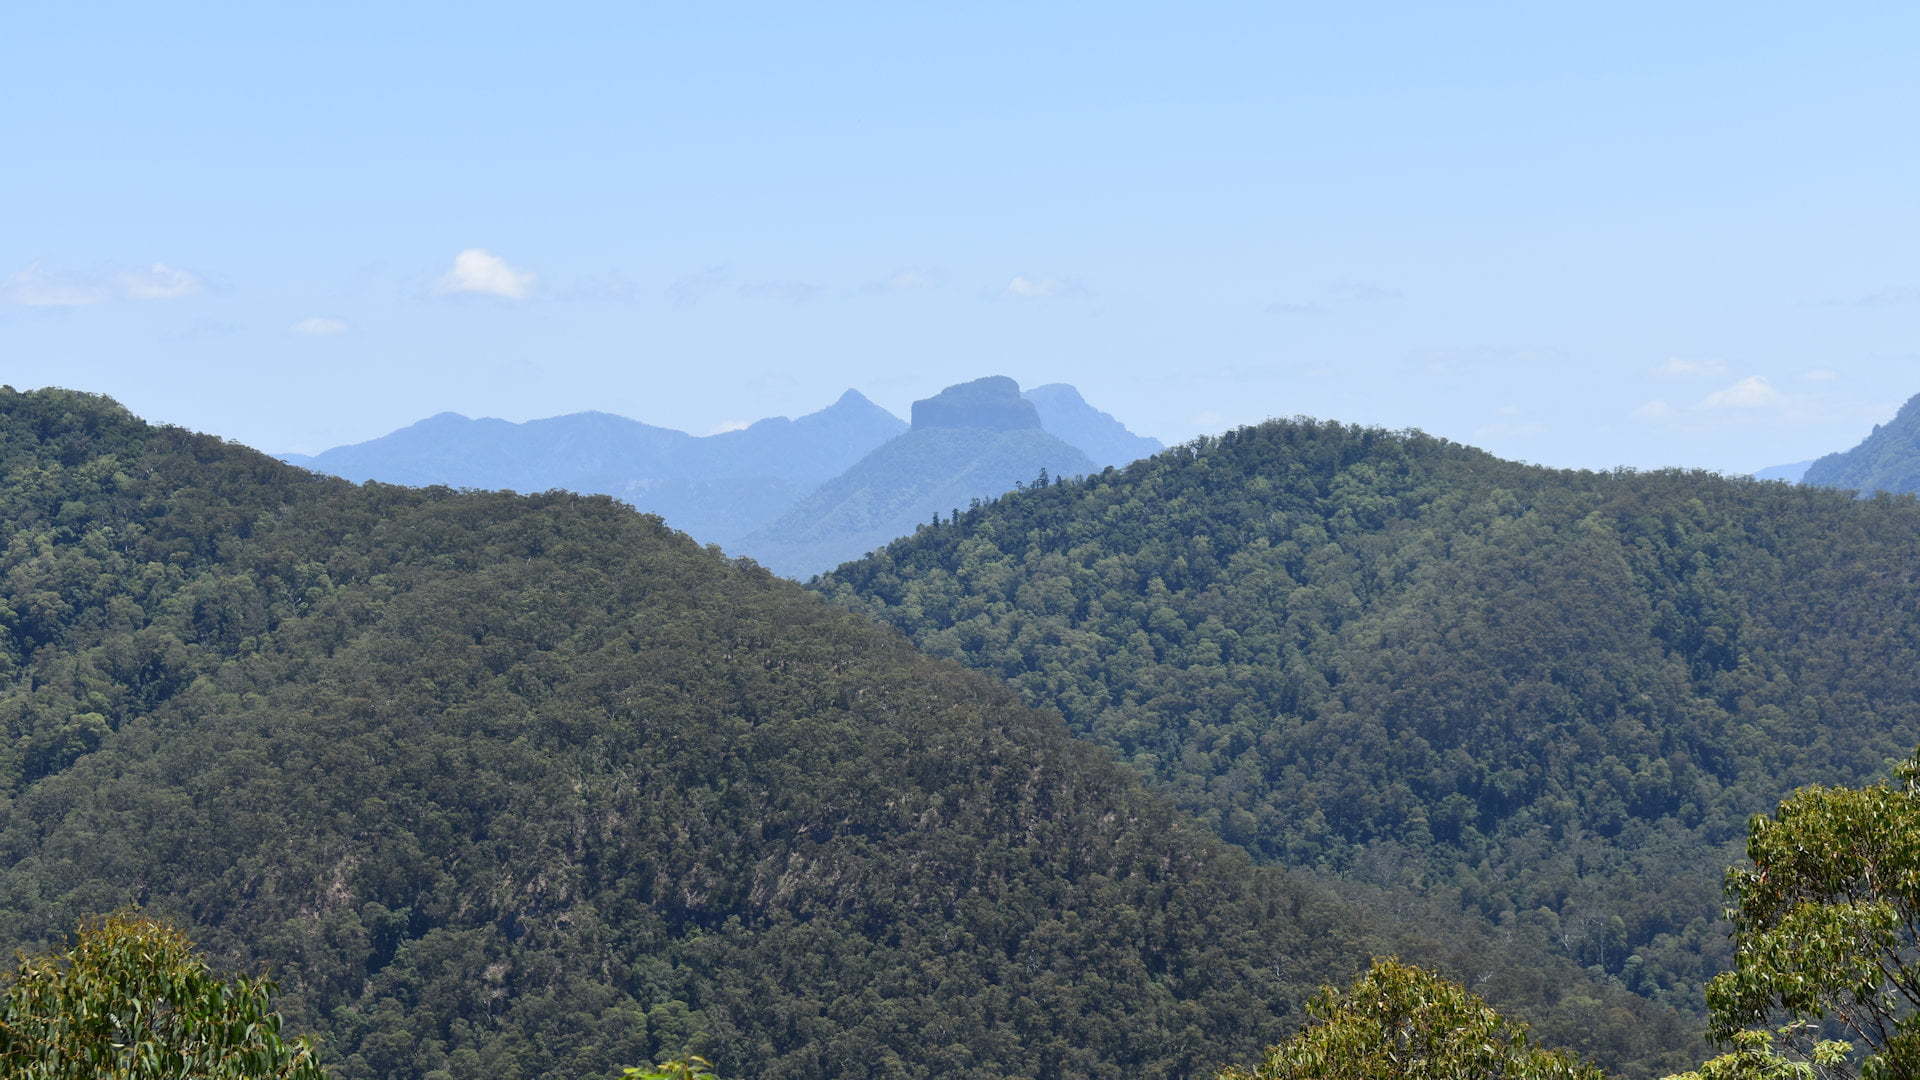 View of mountains and Mt Lindsay in the background, from Sherwood Lookout in Toonumbar National Park